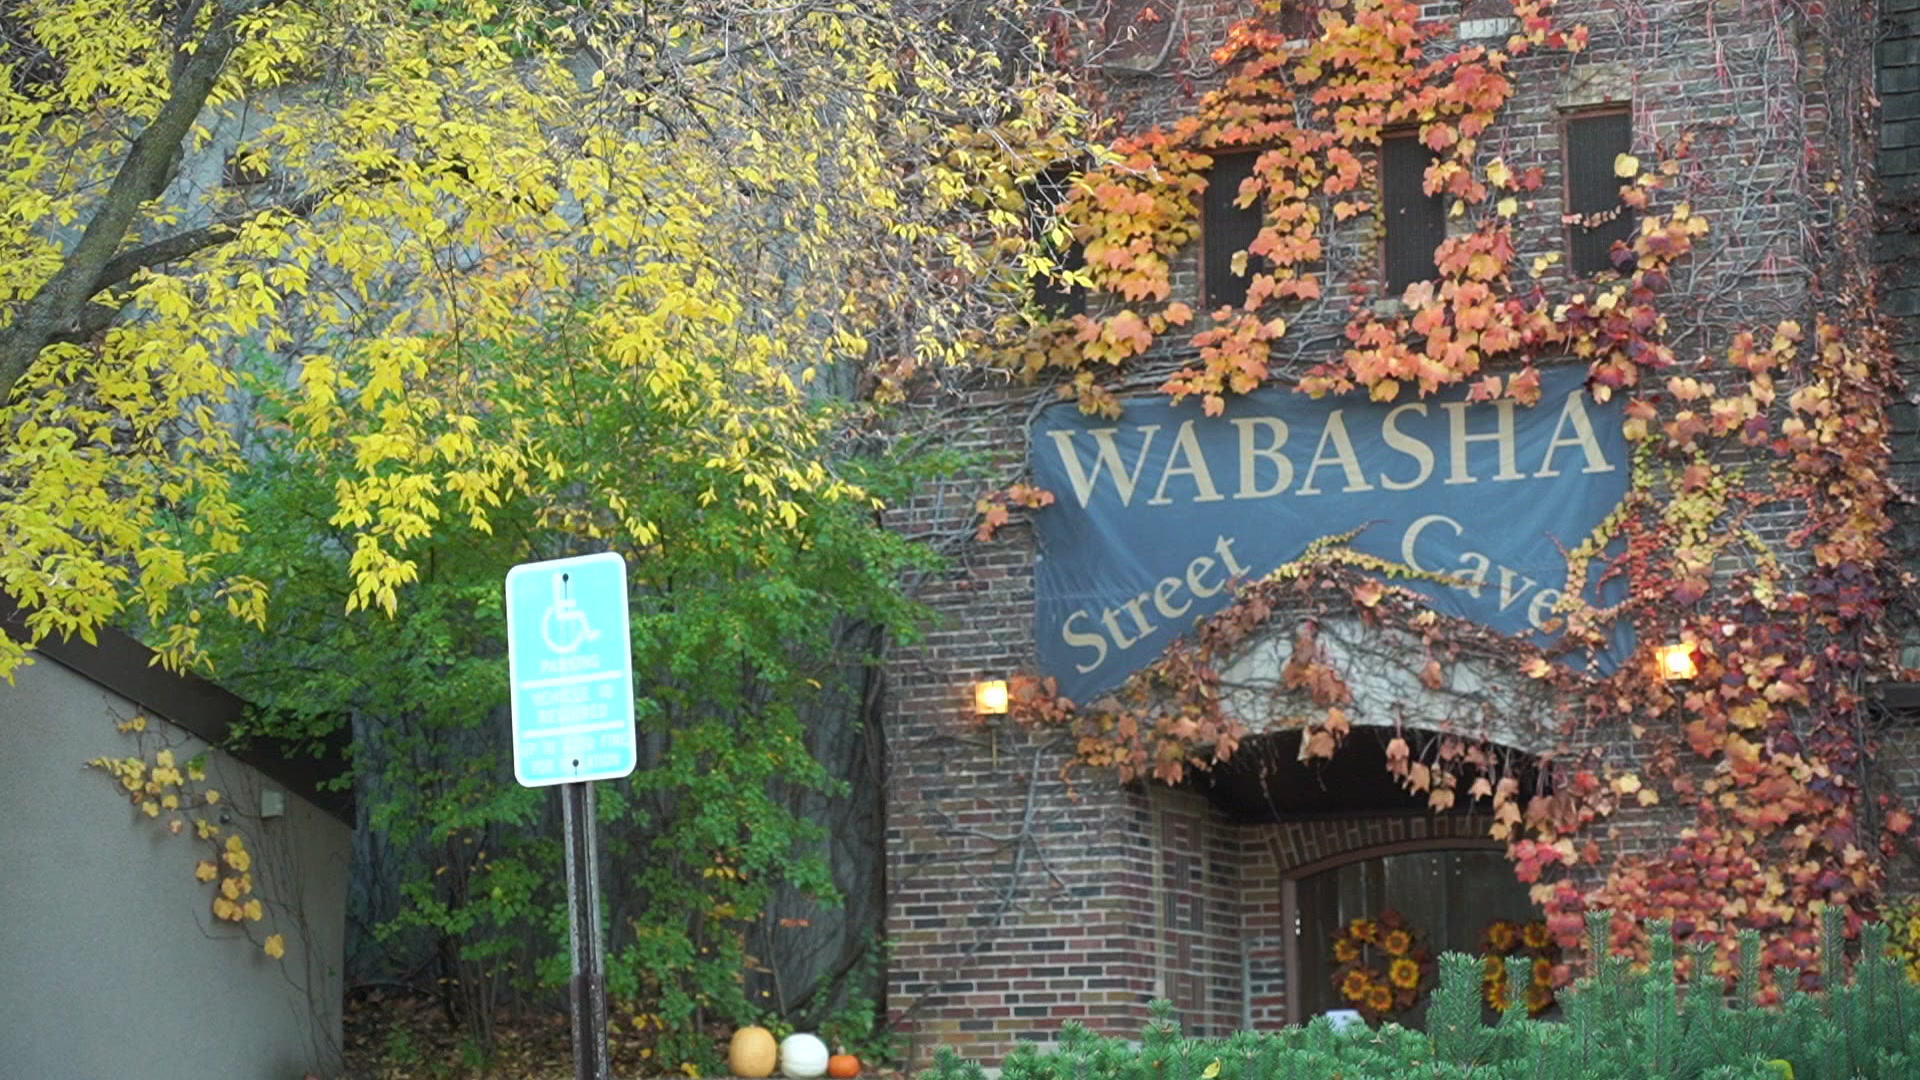 Historic Wabasha Street Caves In St. Paul Begins New Chapter